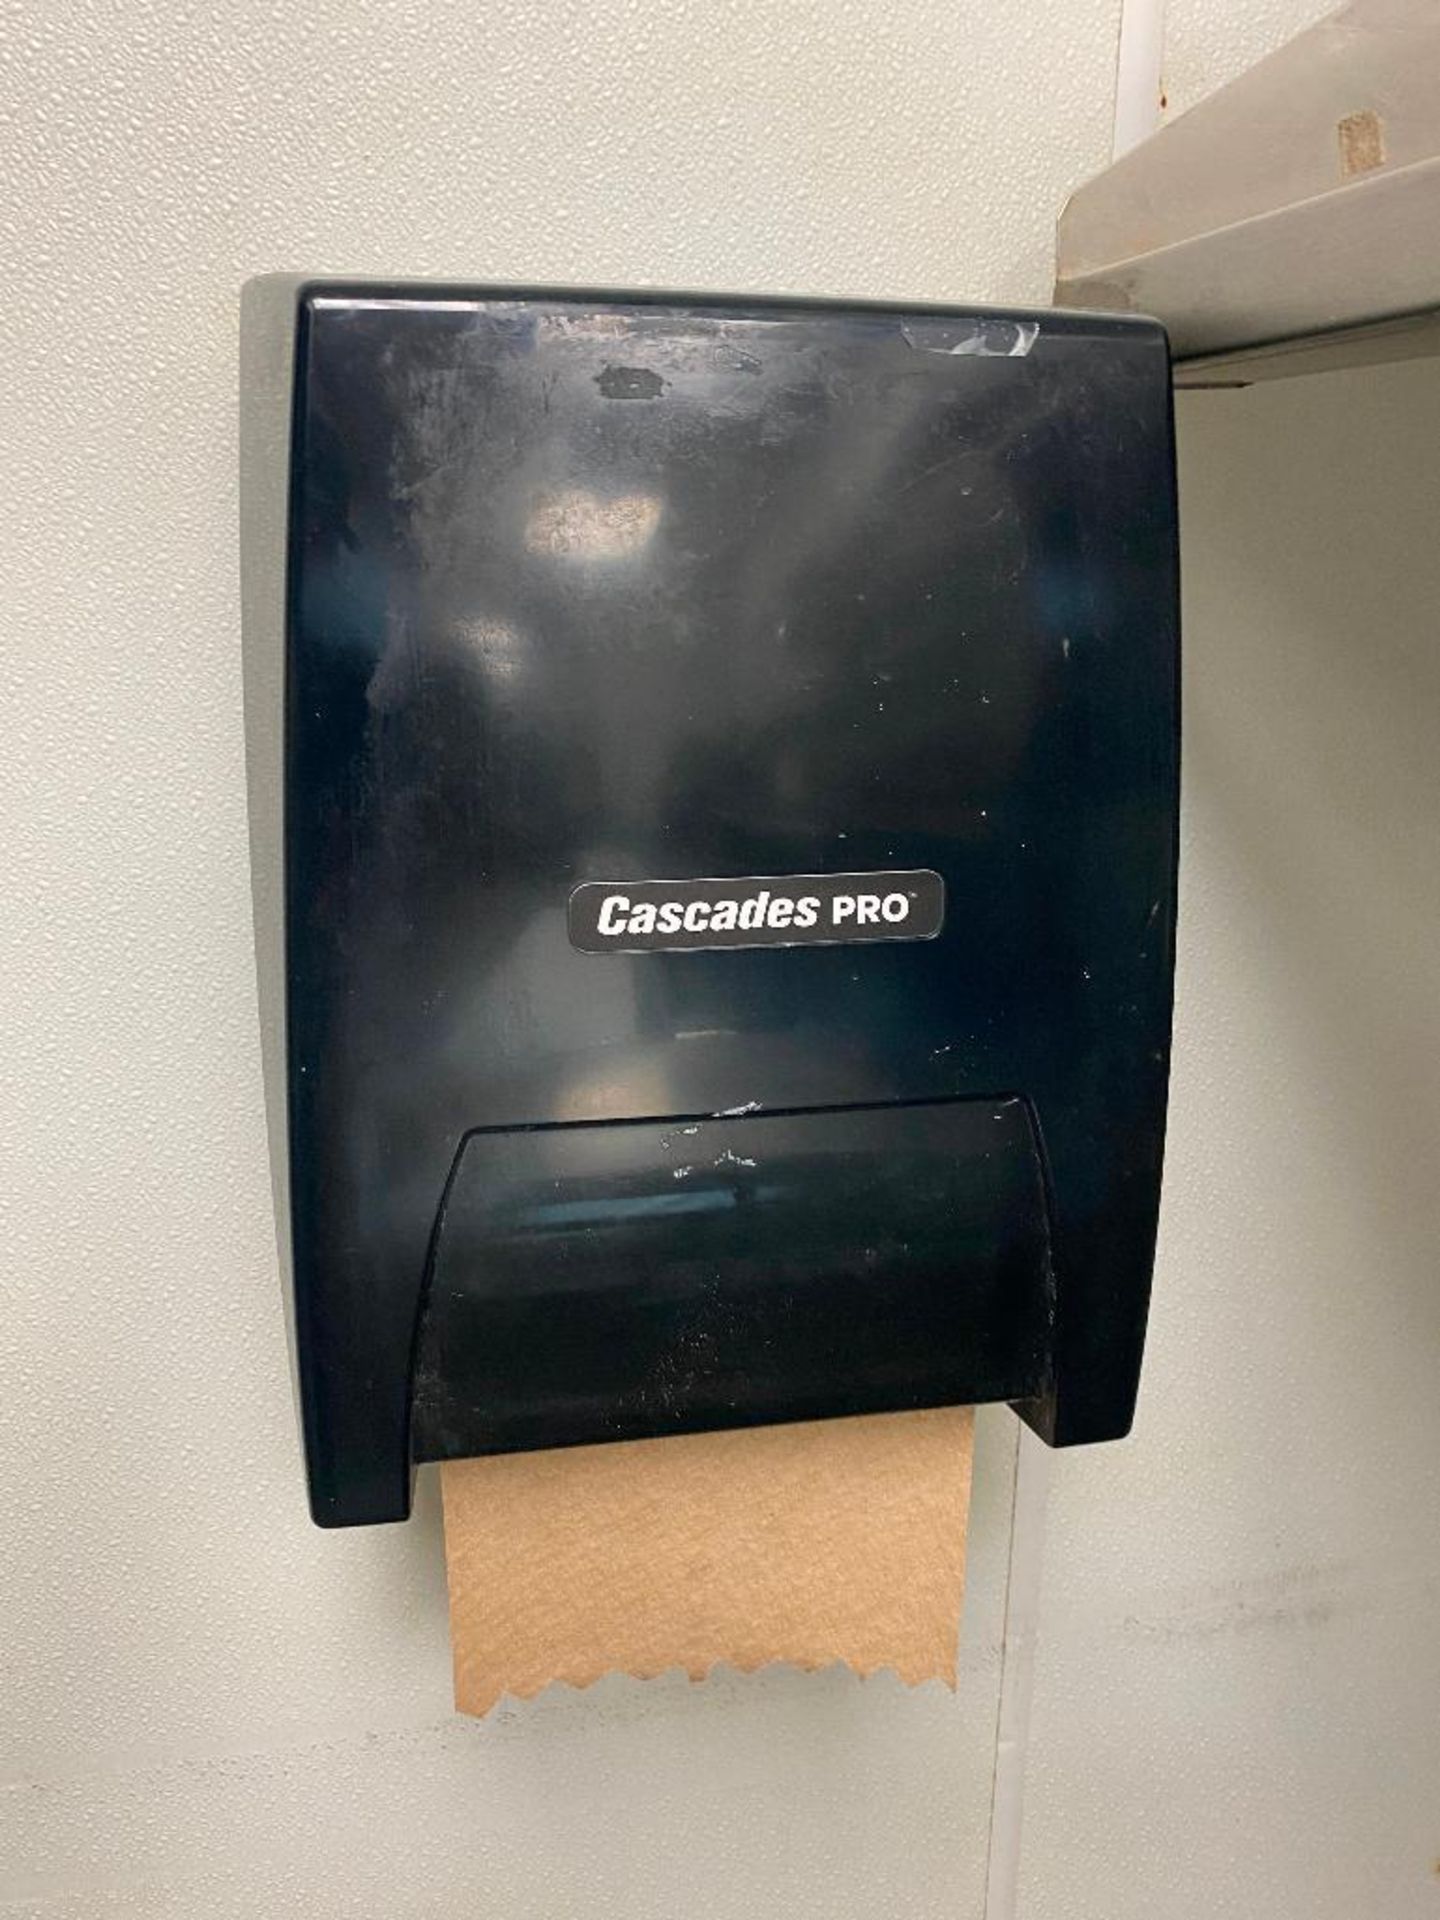 (3) CASCADES PRO PAPER TOWEL DISPENSERS - NOTE: REQUIRES REMOVAL FROM WALL, PLEASE INSPECT - Image 3 of 4